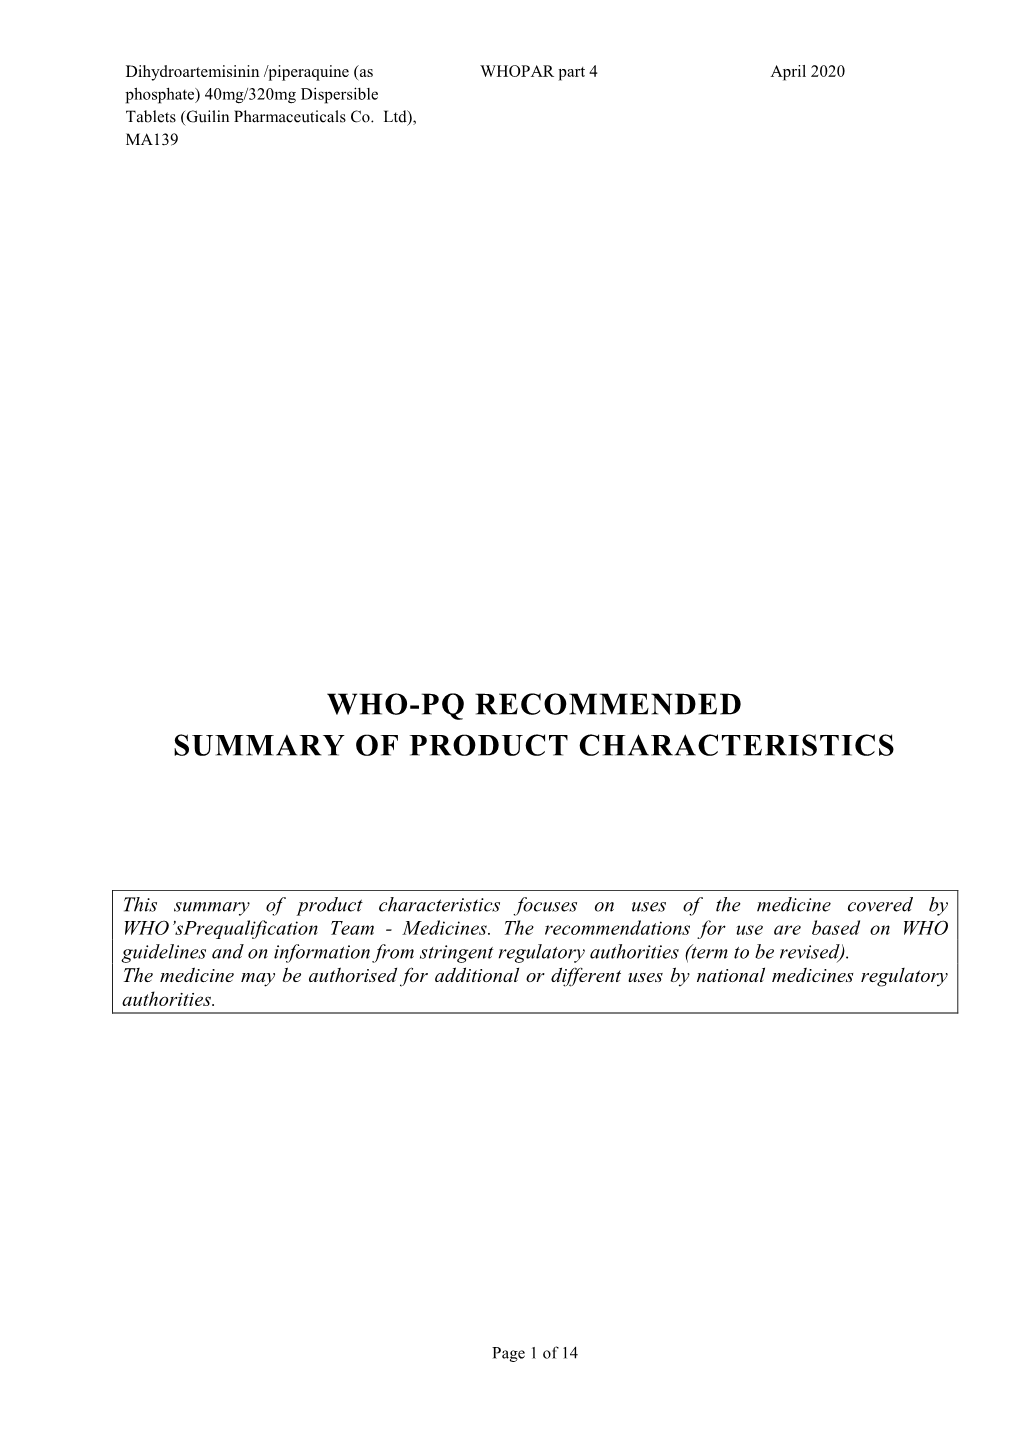 Who-Pq Recommended Summary of Product Characteristics